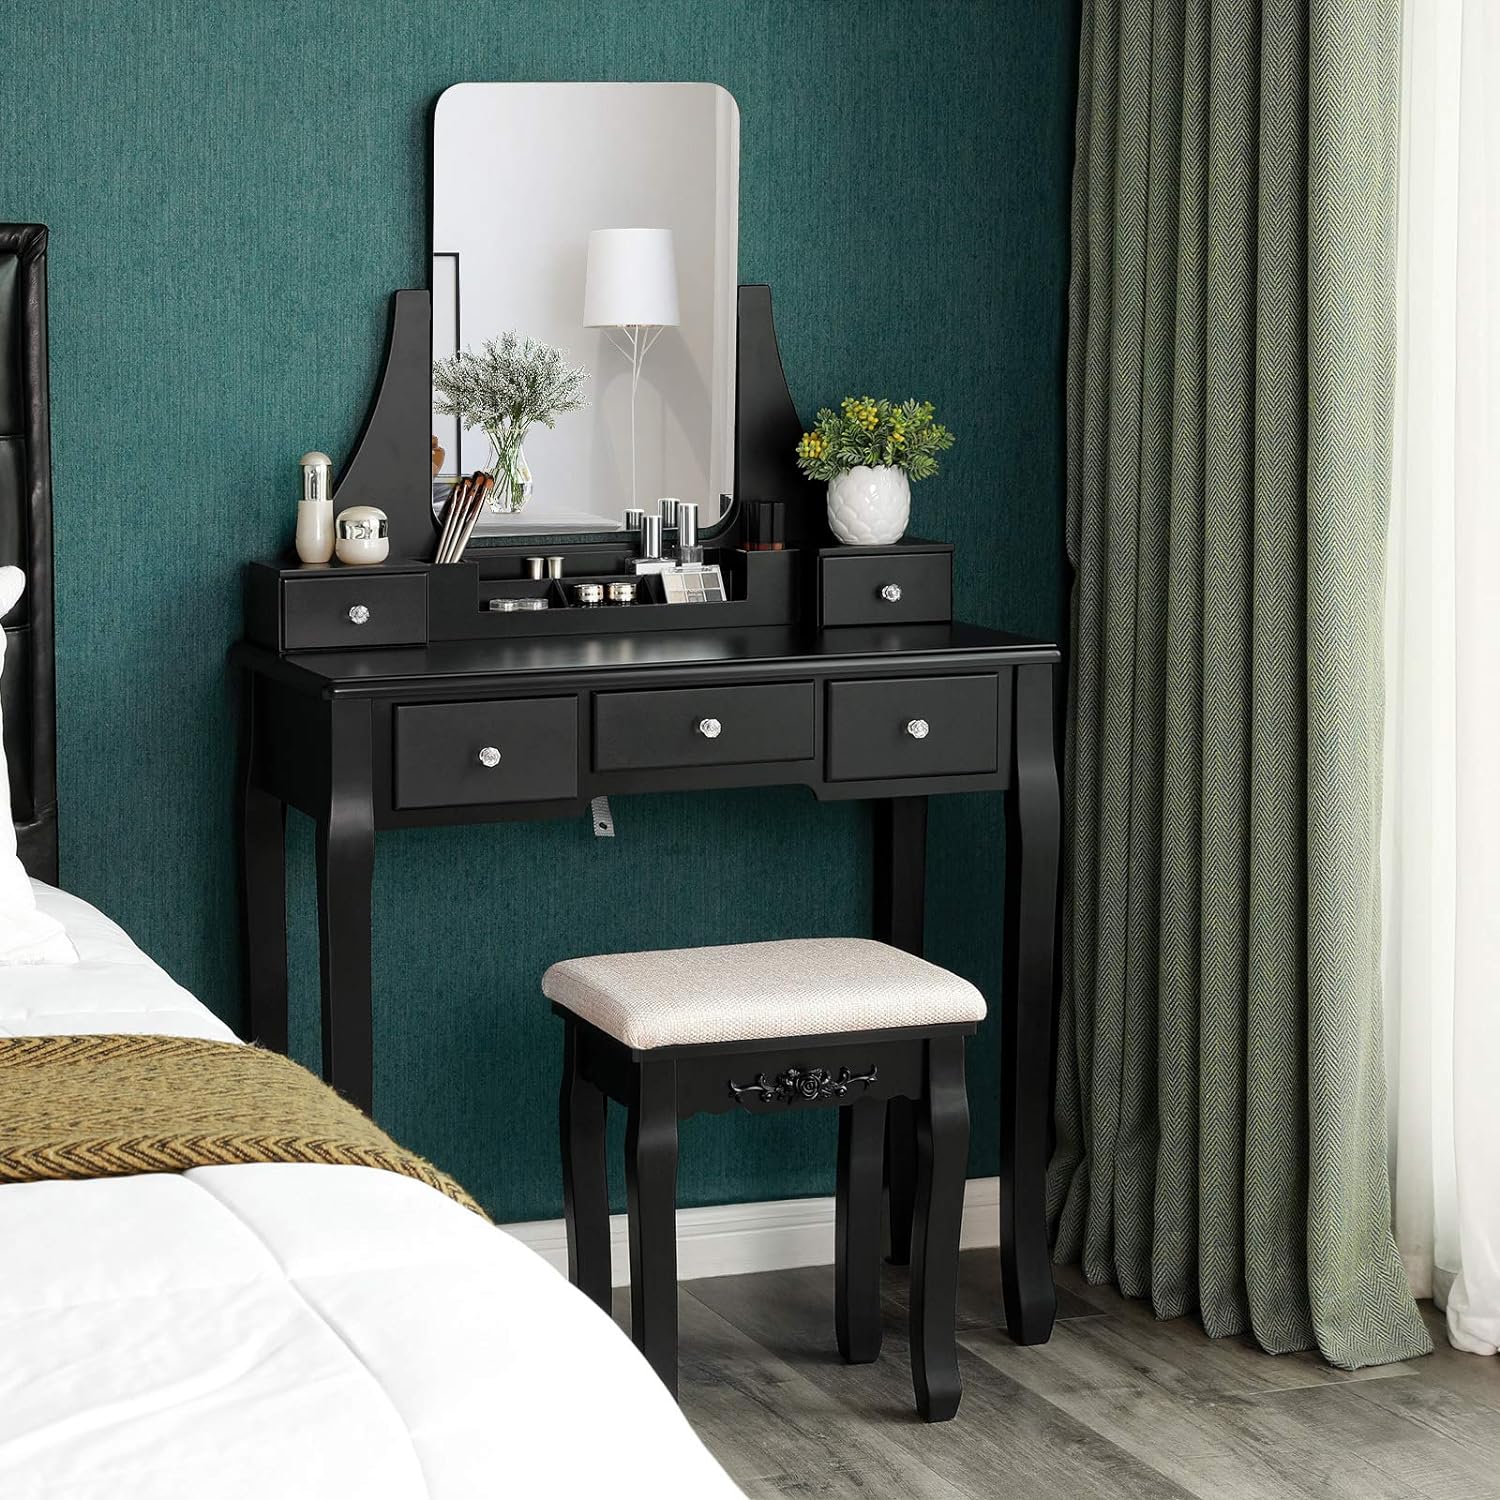 Vanity Set, Dressing Table Set with Large Frameless Mirror for Makeup, 5 Drawers, Cushioned Stool Included